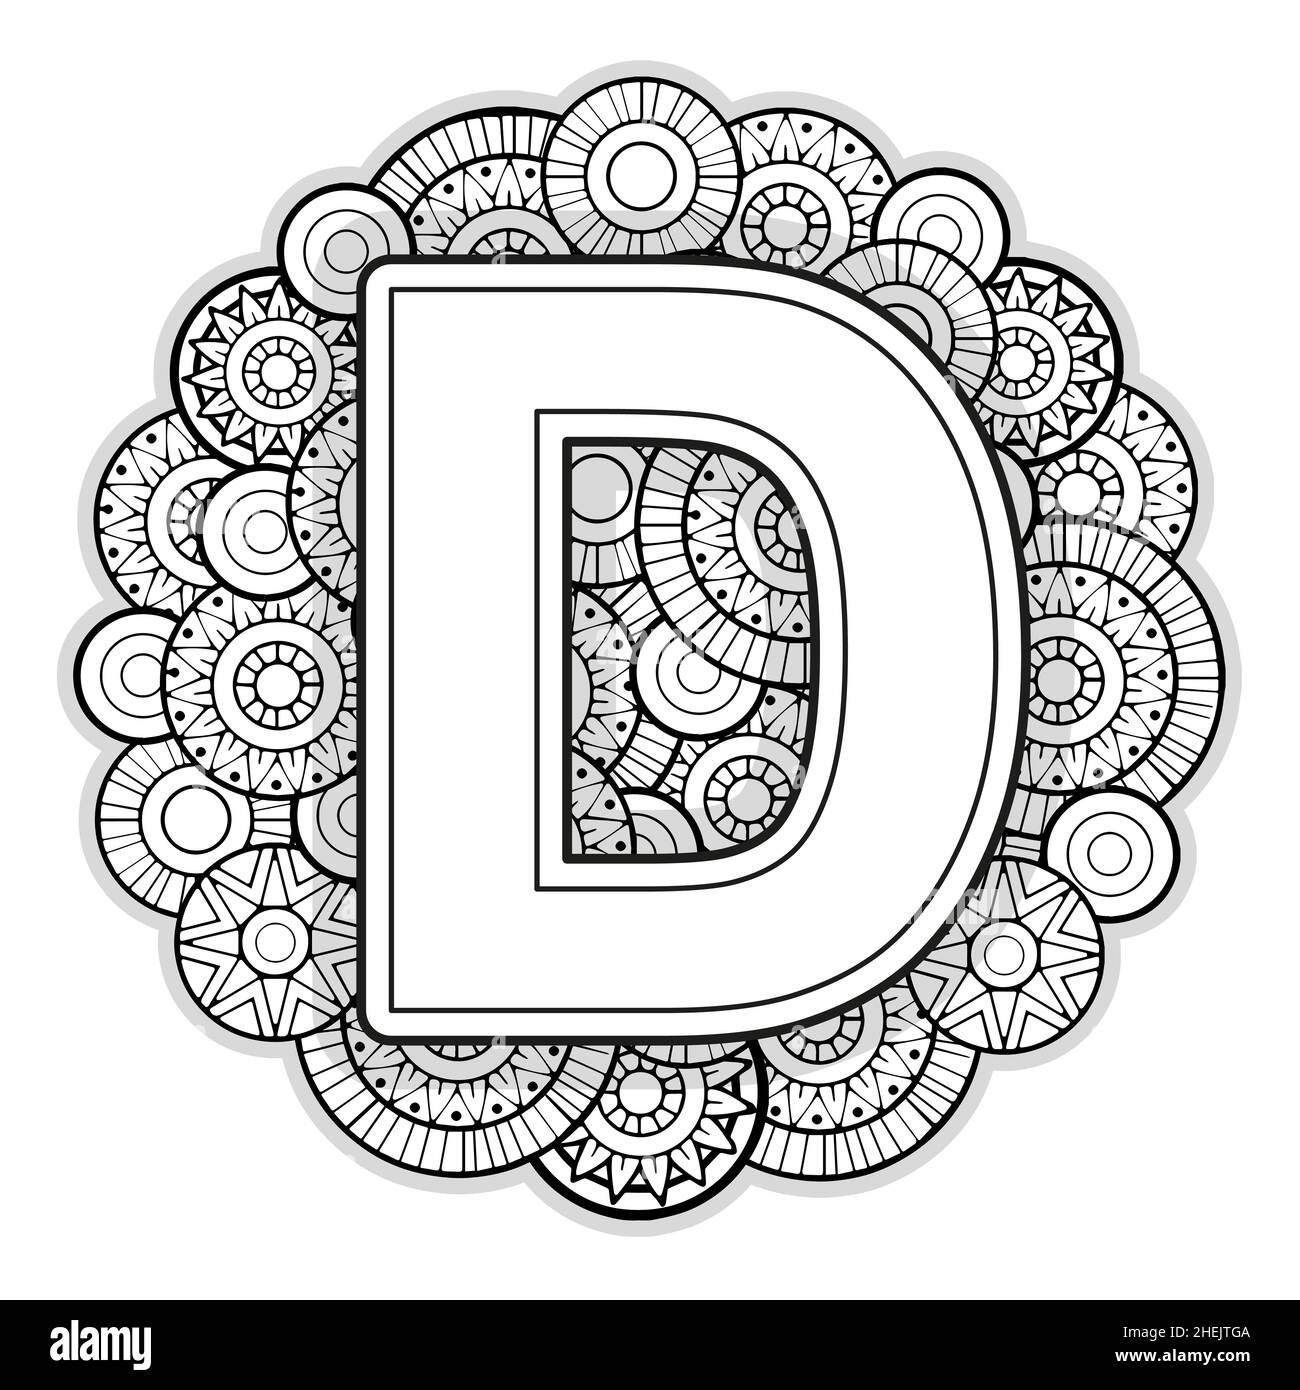 Letter d coloring pages stock vector images